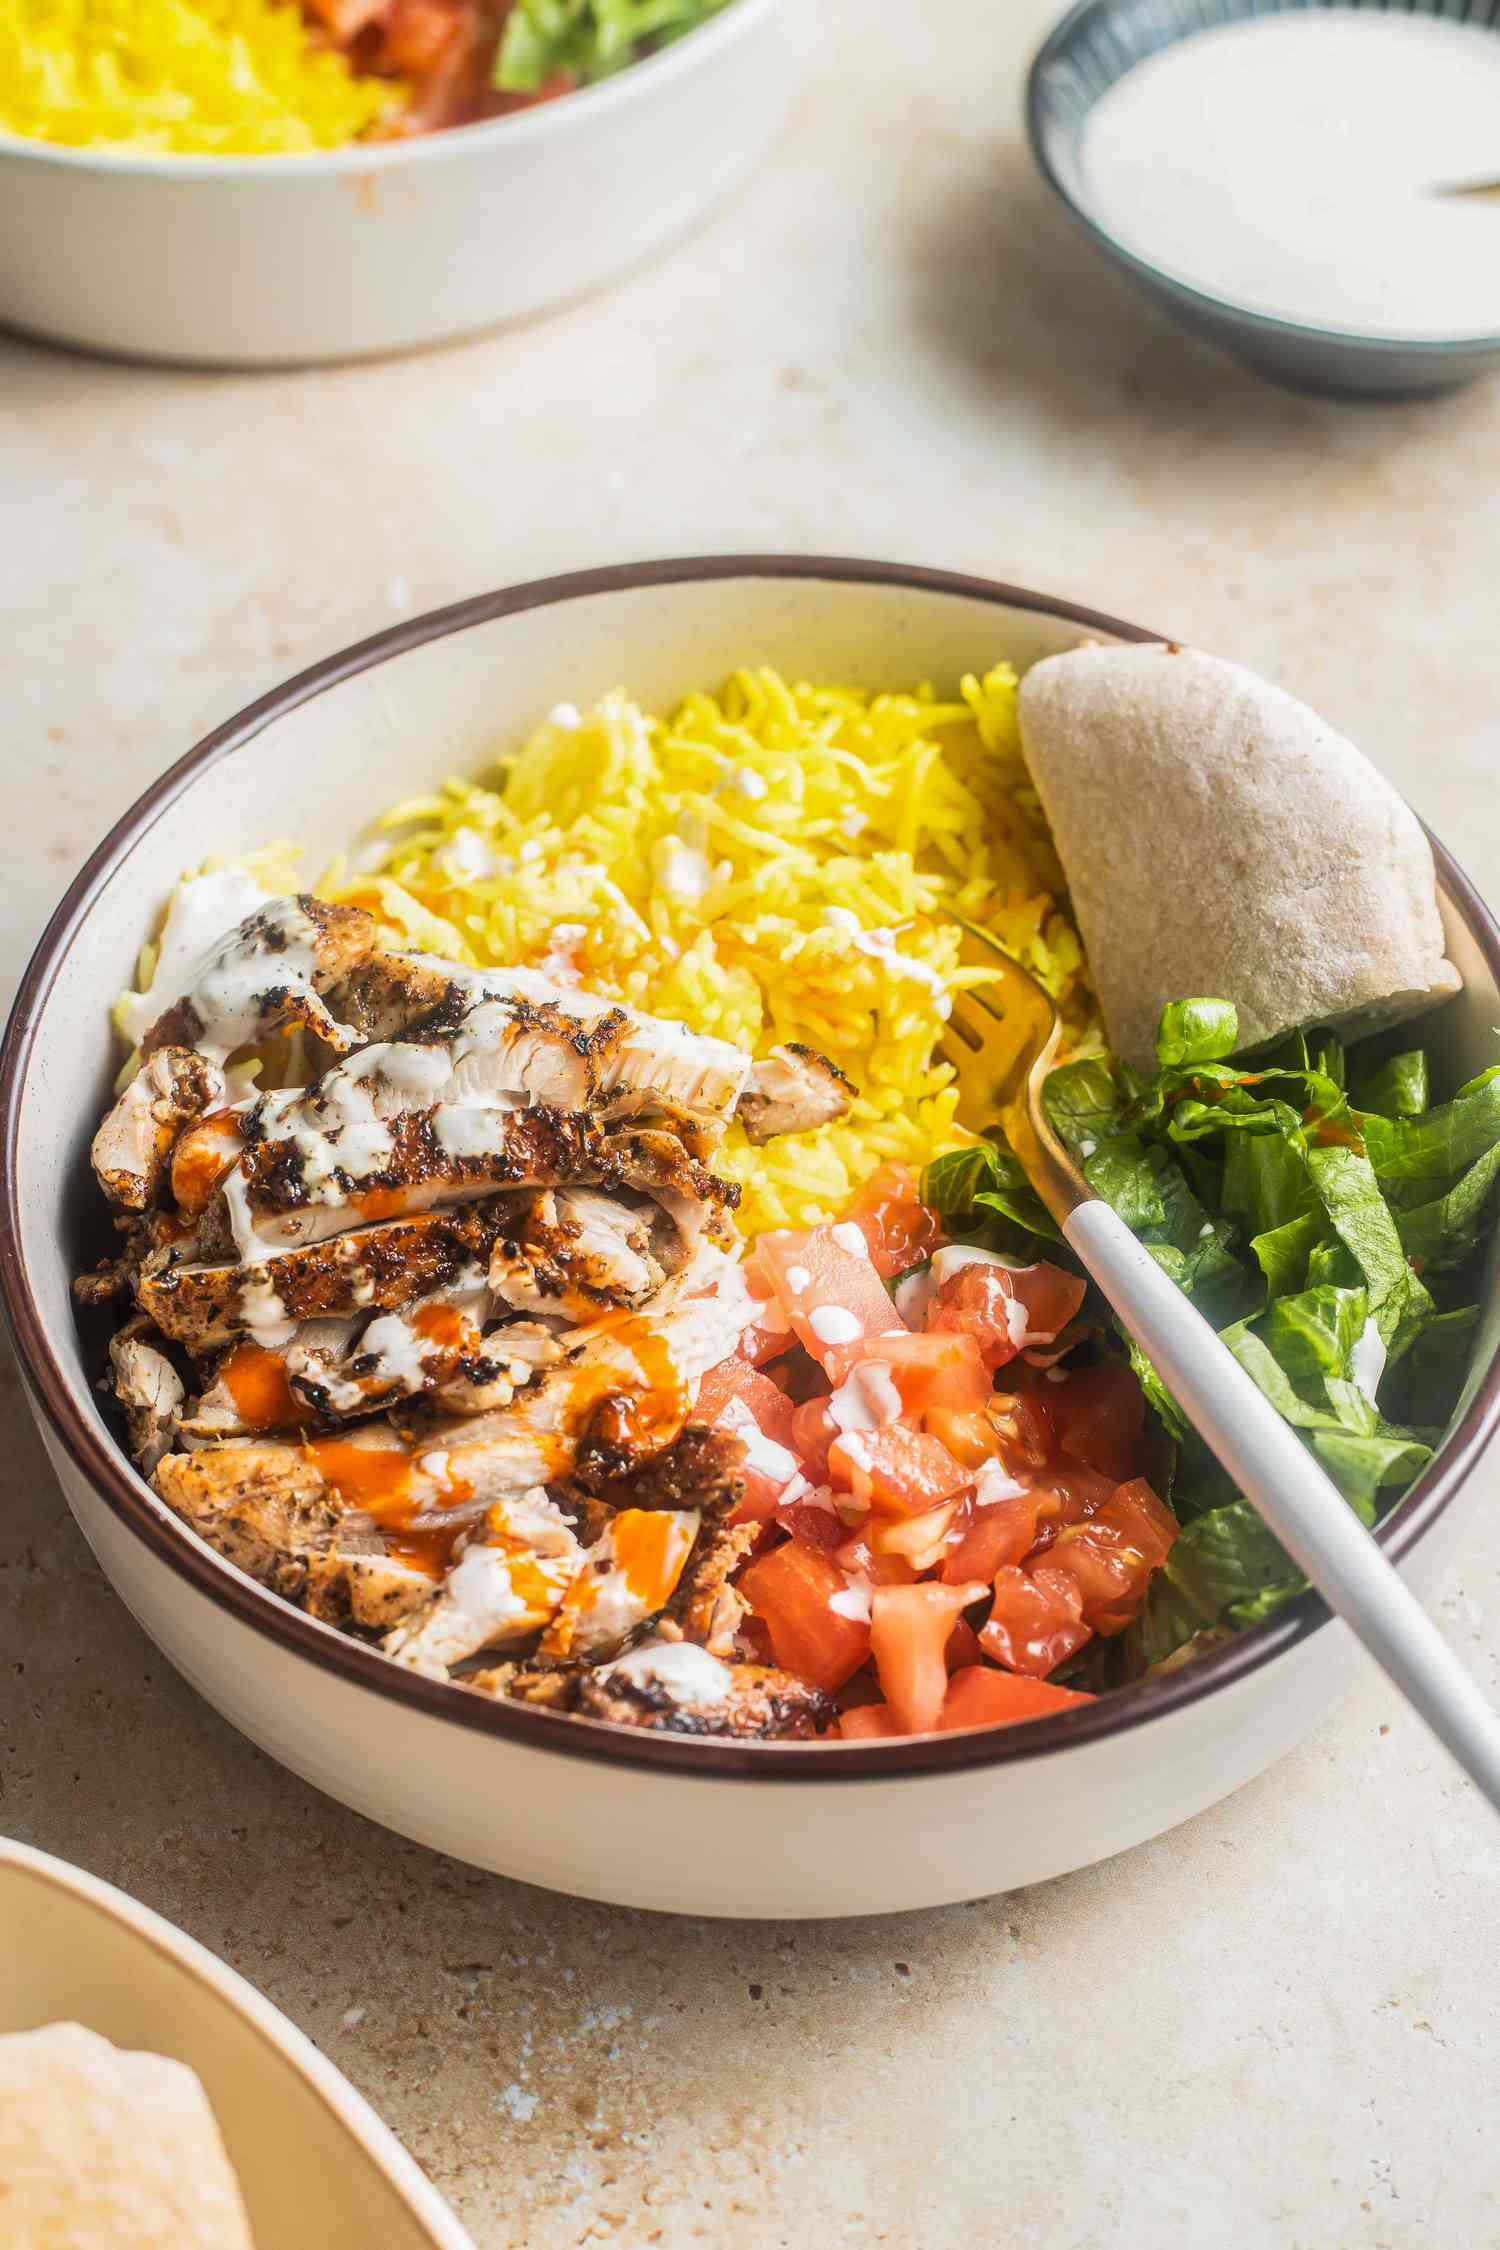  Bowl of Halal Cart-Style Chicken Over Rice Next a Bowl of Dressing and Another Bowl With Another Serving